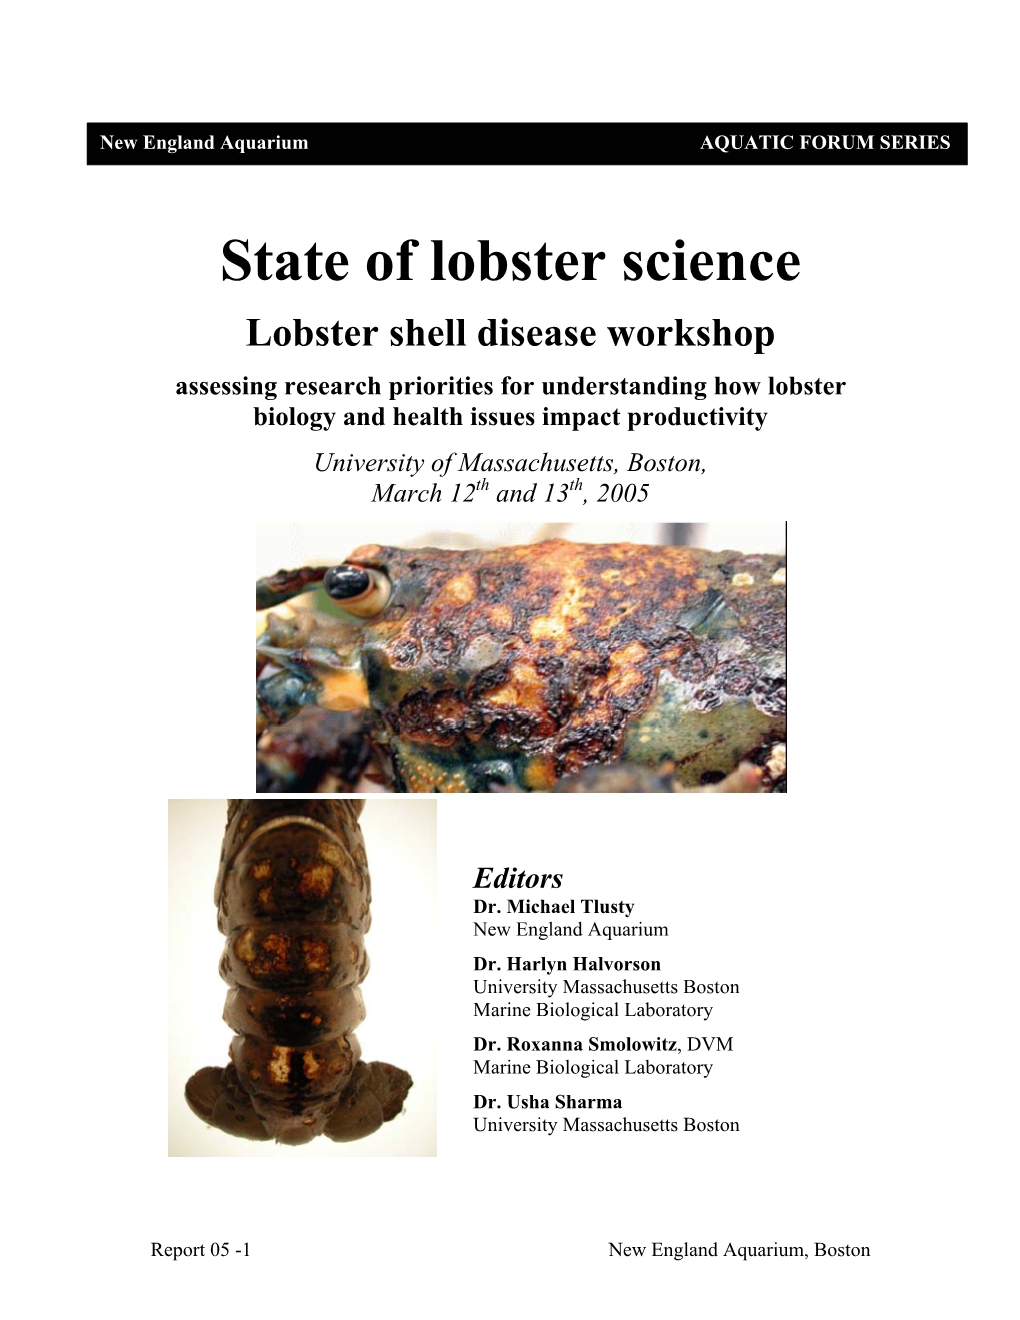 State of Lobster Science